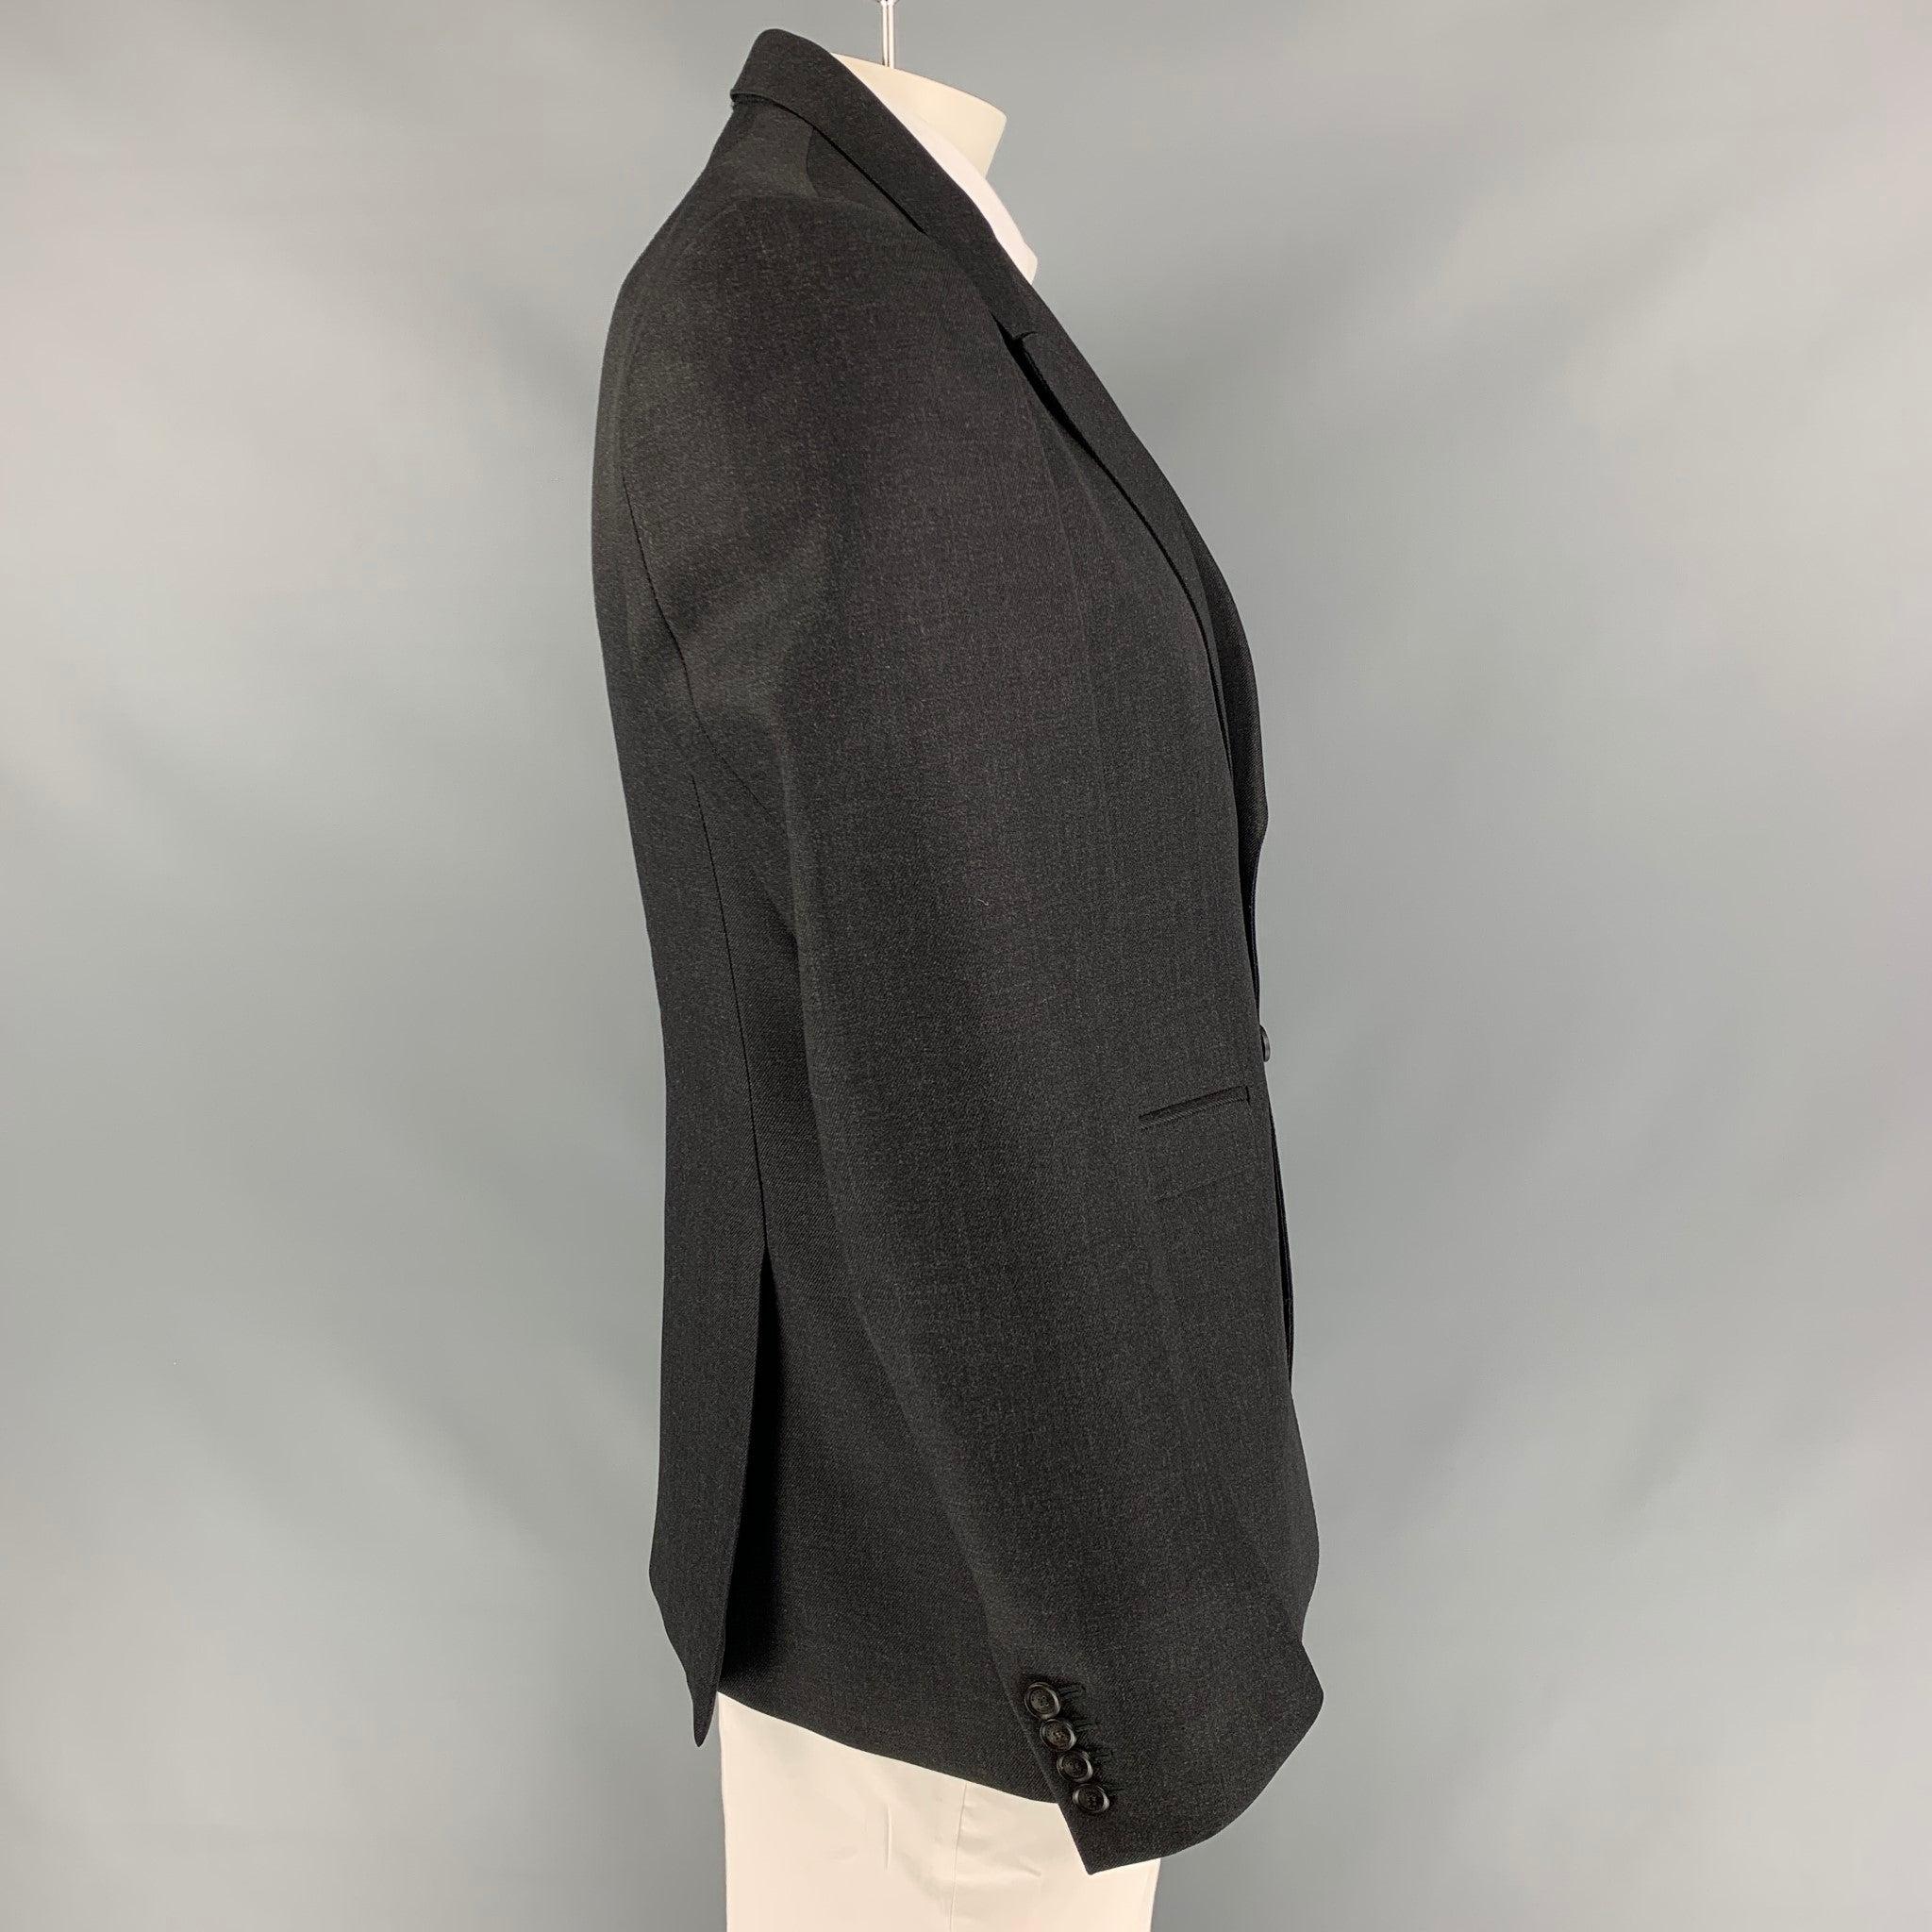 BURBERRY PRORSUM Size 44 Regular Charcoal Wool Notch Lapel Sport Coat In Good Condition For Sale In San Francisco, CA